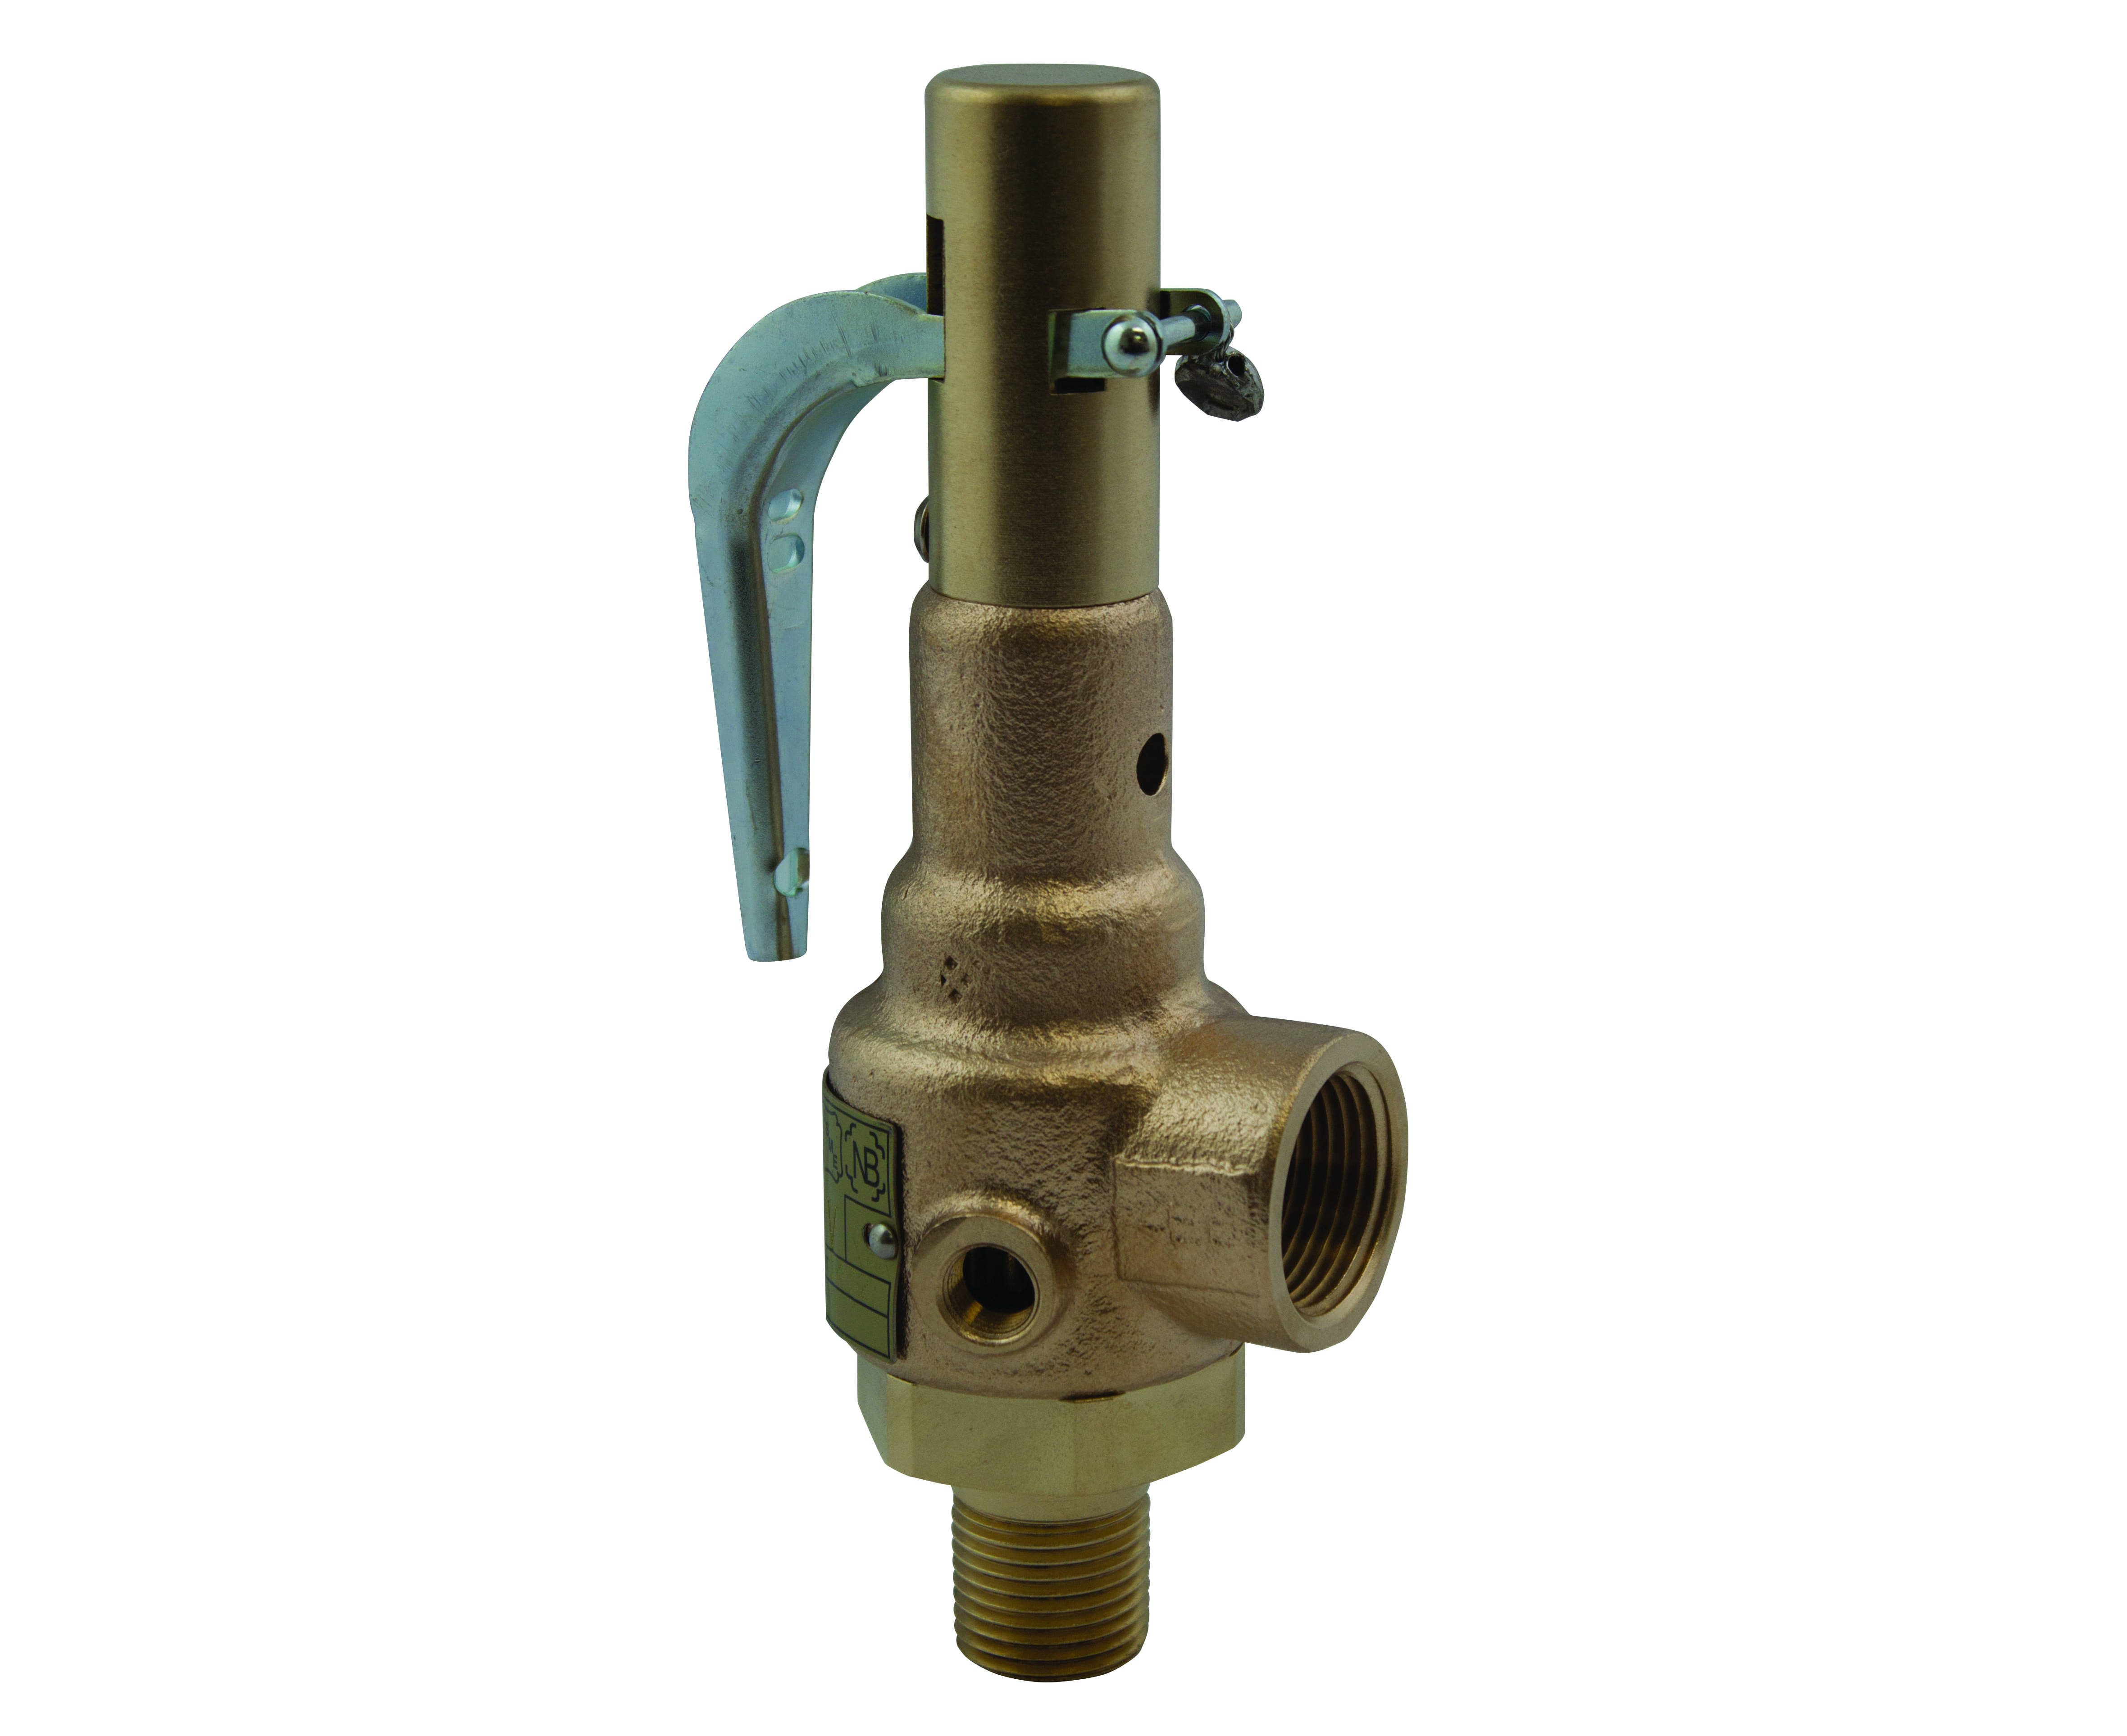 Preview image for Apollo ASME Sec I Steam Bronze Safety Relief Valves with Brass Trim, Teflon Seat, CE/PED Compliant, 3/4" x 1" (MNPT x FNPT)